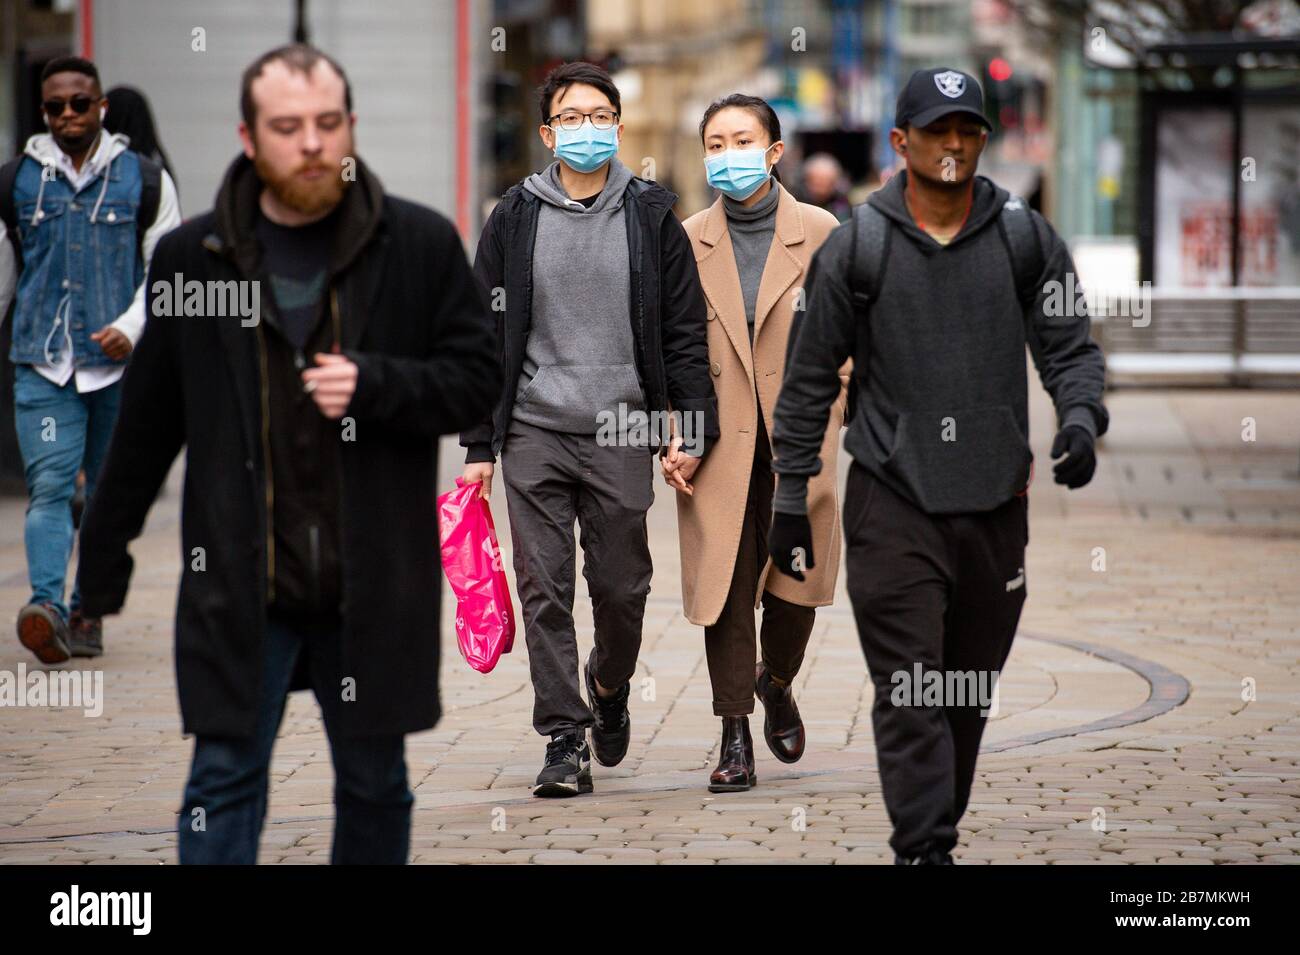 People wearing protective masks in Manchester, the day after Prime Minister Boris Johnson called on people to stay away from pubs, clubs and theatres, work from home if possible and avoid all non-essential contacts and travel in order to reduce the impact of the coronavirus pandemic. Stock Photo